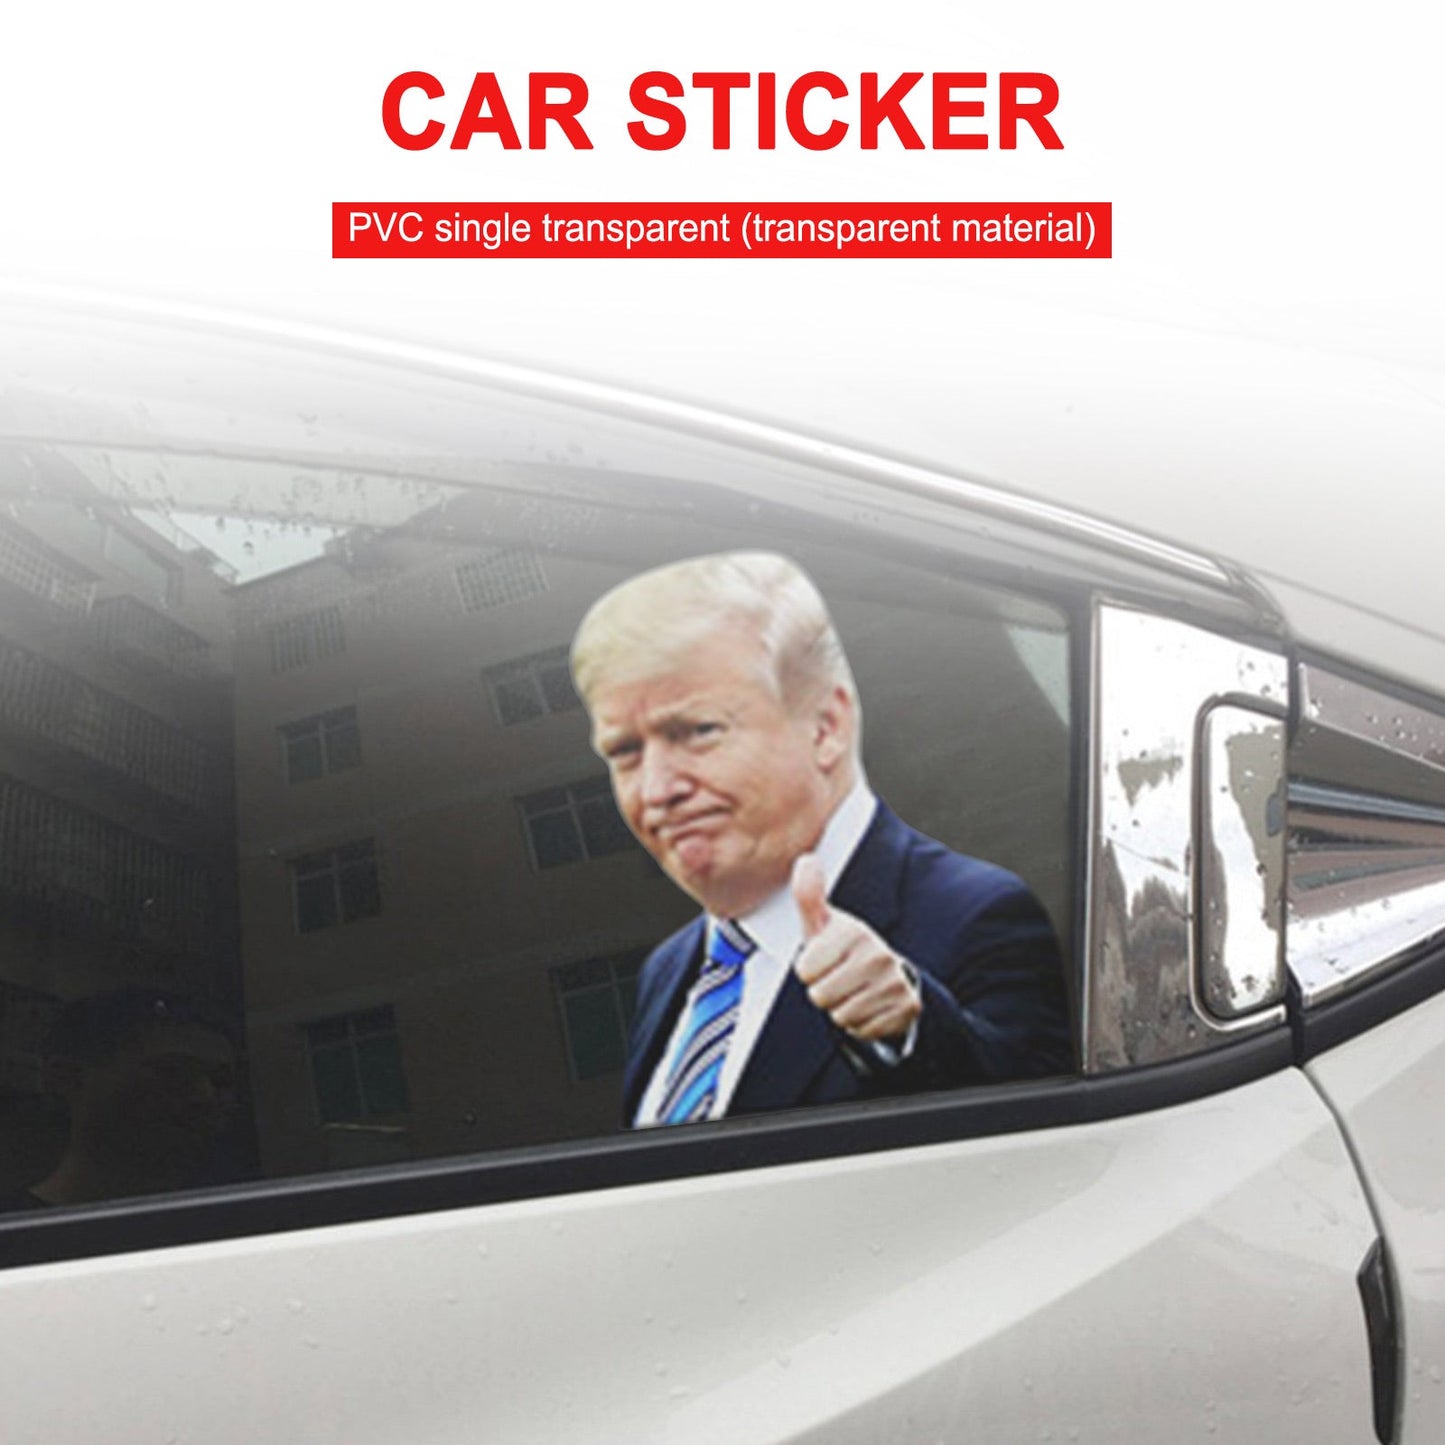 2020 Auto Person Decal Trump Presidential Election Front Left Window